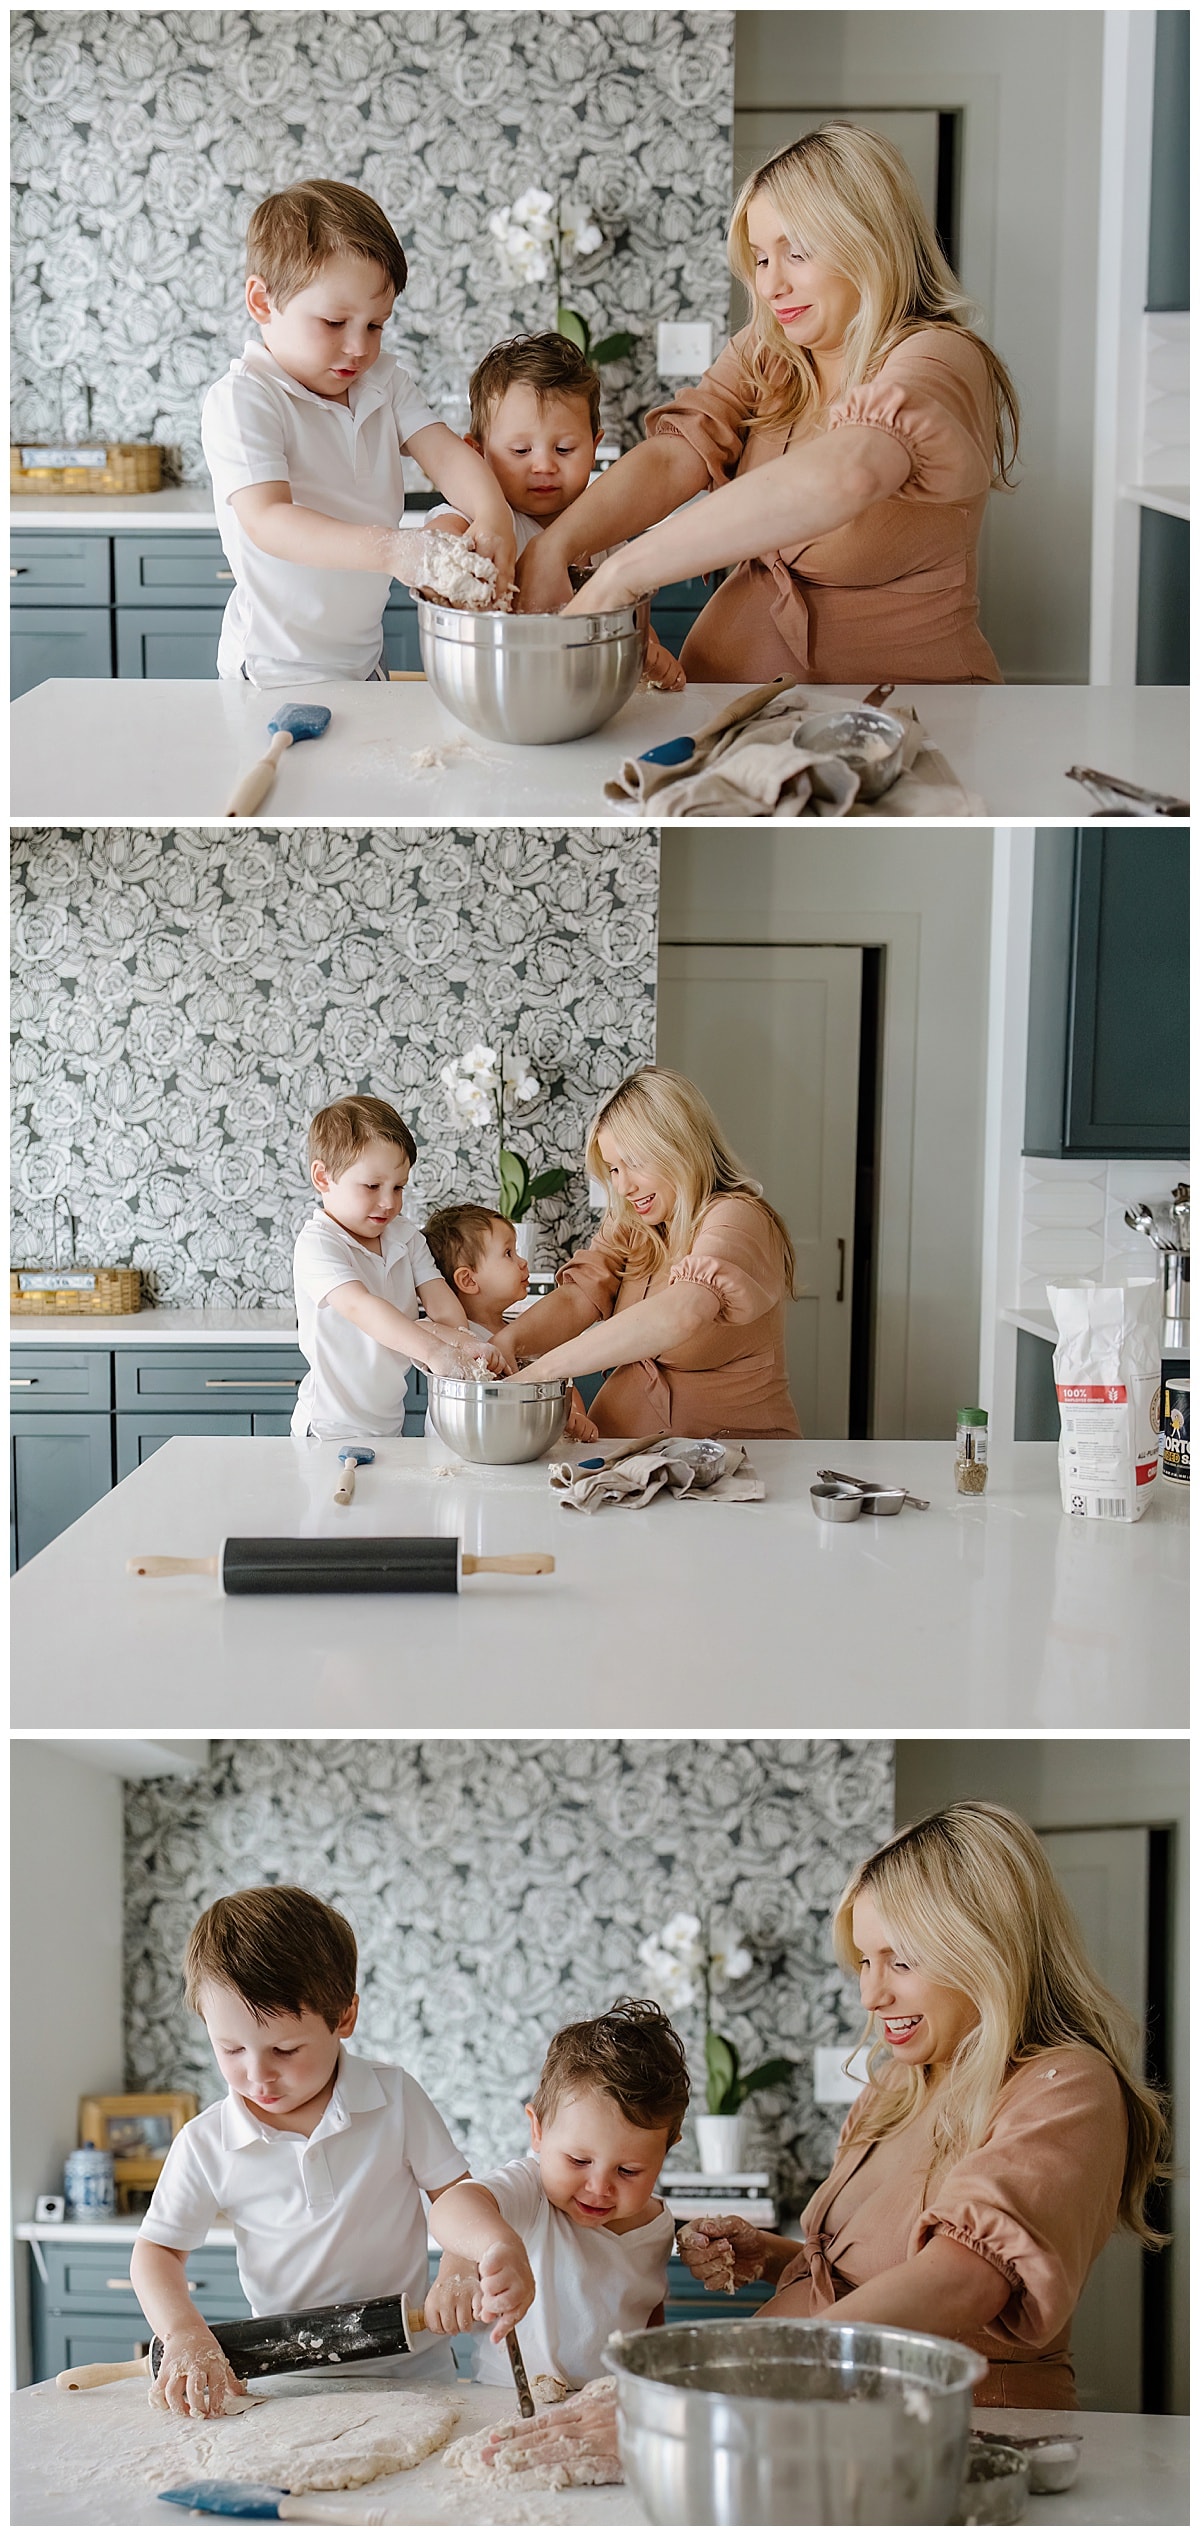 Mom and son bake together during their in home maternity session